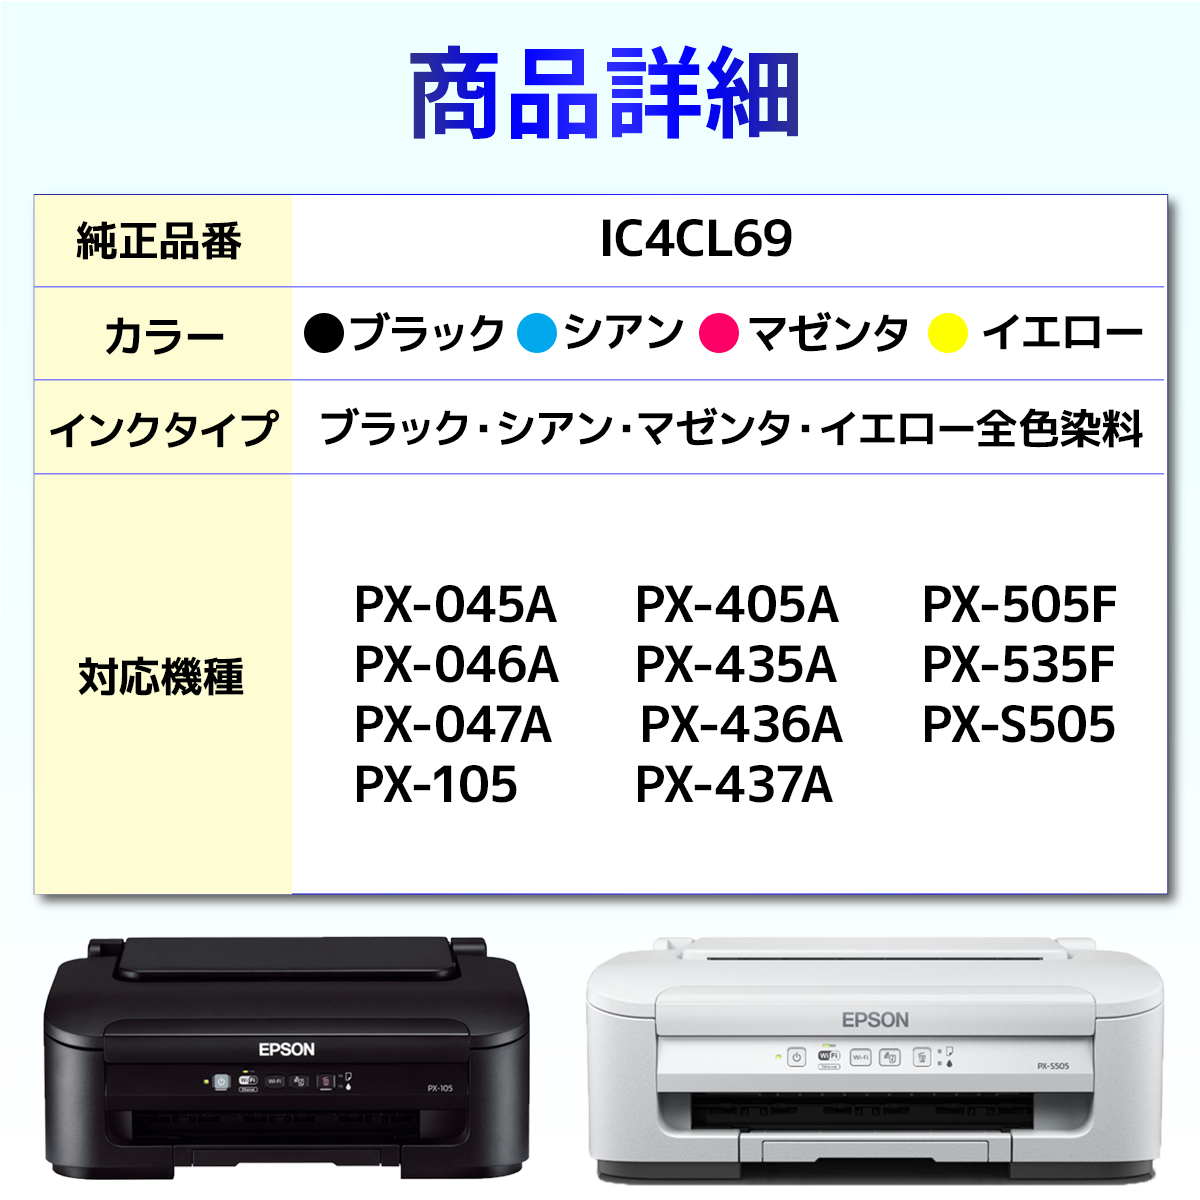 IC4CL69 IC69 互換 インク 砂時計 3色セット EPSON エプソン PX-045A PX-046A PX-047A PX-105 PX-405A PX-435A PX-436A PX-437A PX-505F PX-535F PX-S505｜baustore｜03